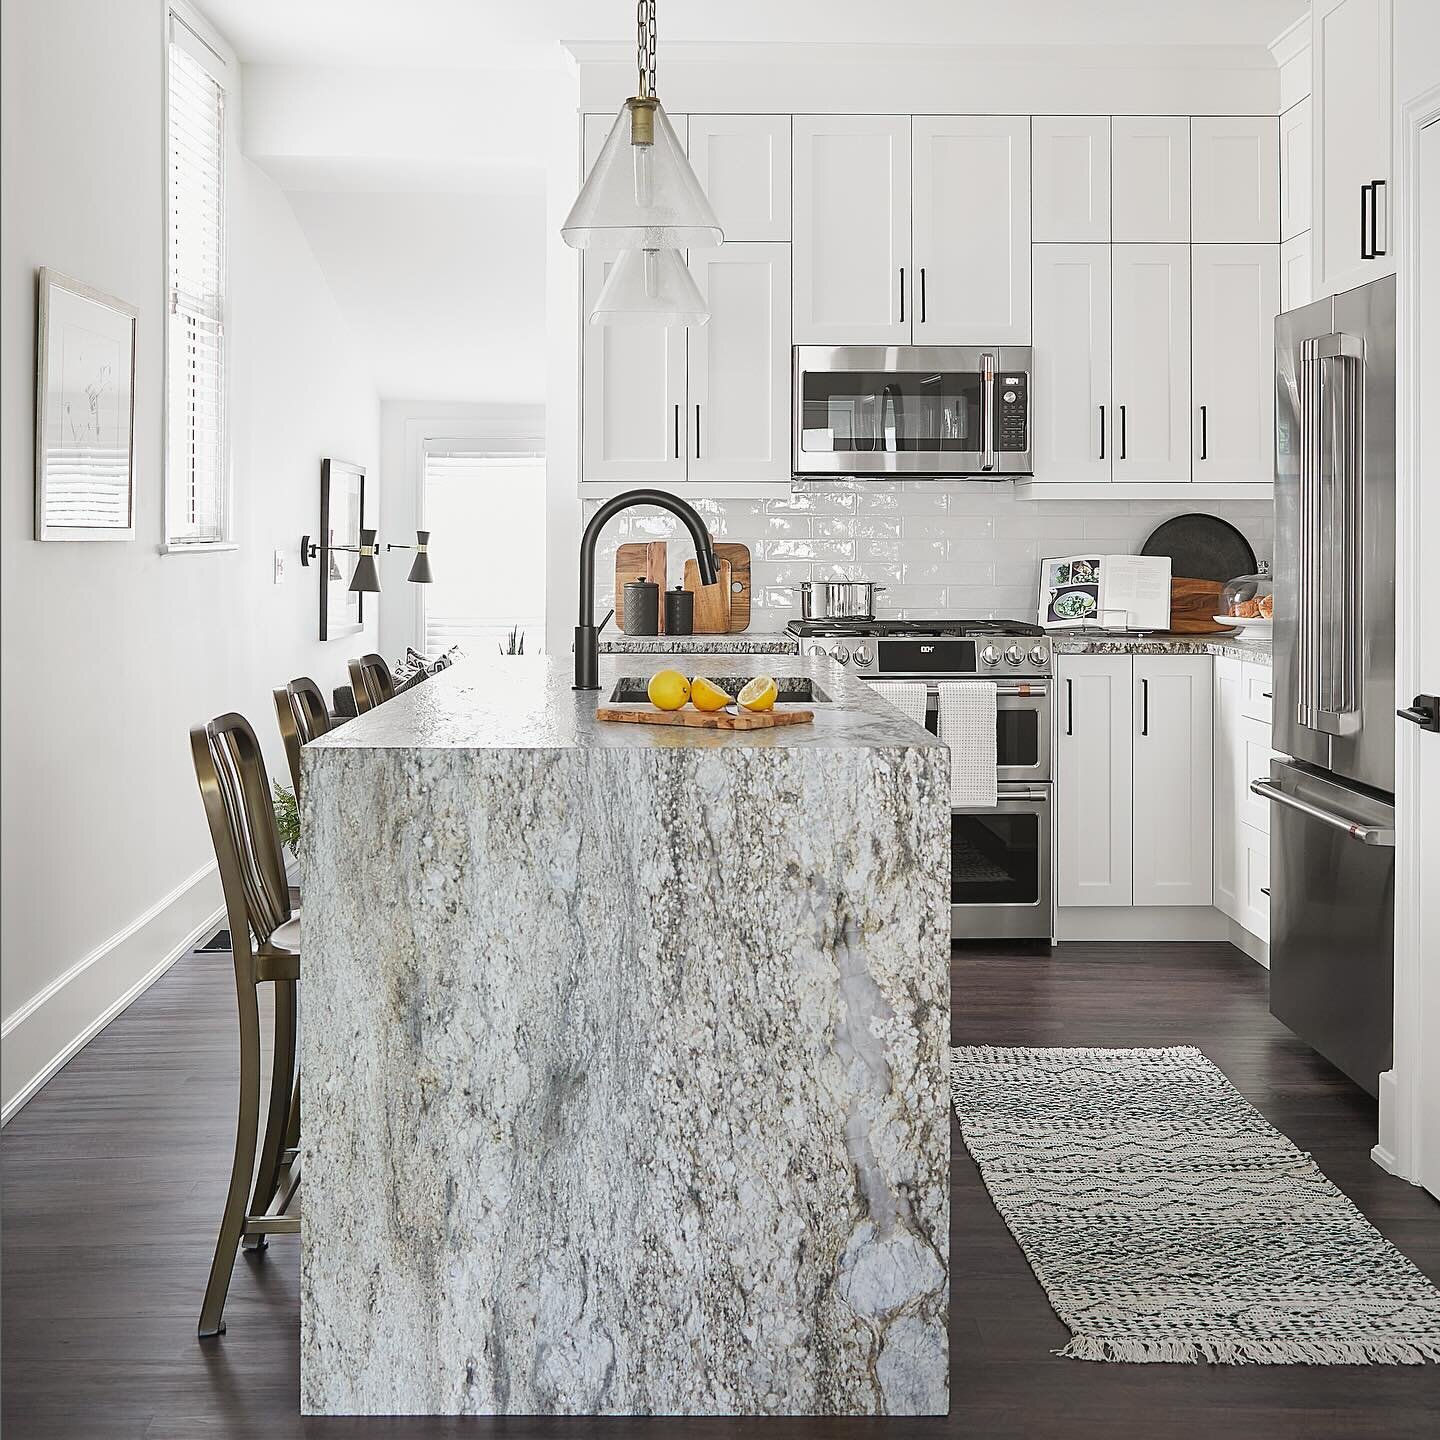 Natural stone is really making a comeback and I am here for it! ⁣This stone was the show stopper for this kitchen at #kmsdprojectbold. 
⁣
Are you yay or nay for this shift?⁣

📸 @n_haze 
⁣
#kmsdprojectbold #interiordesign #interiors #kitchendesign #k